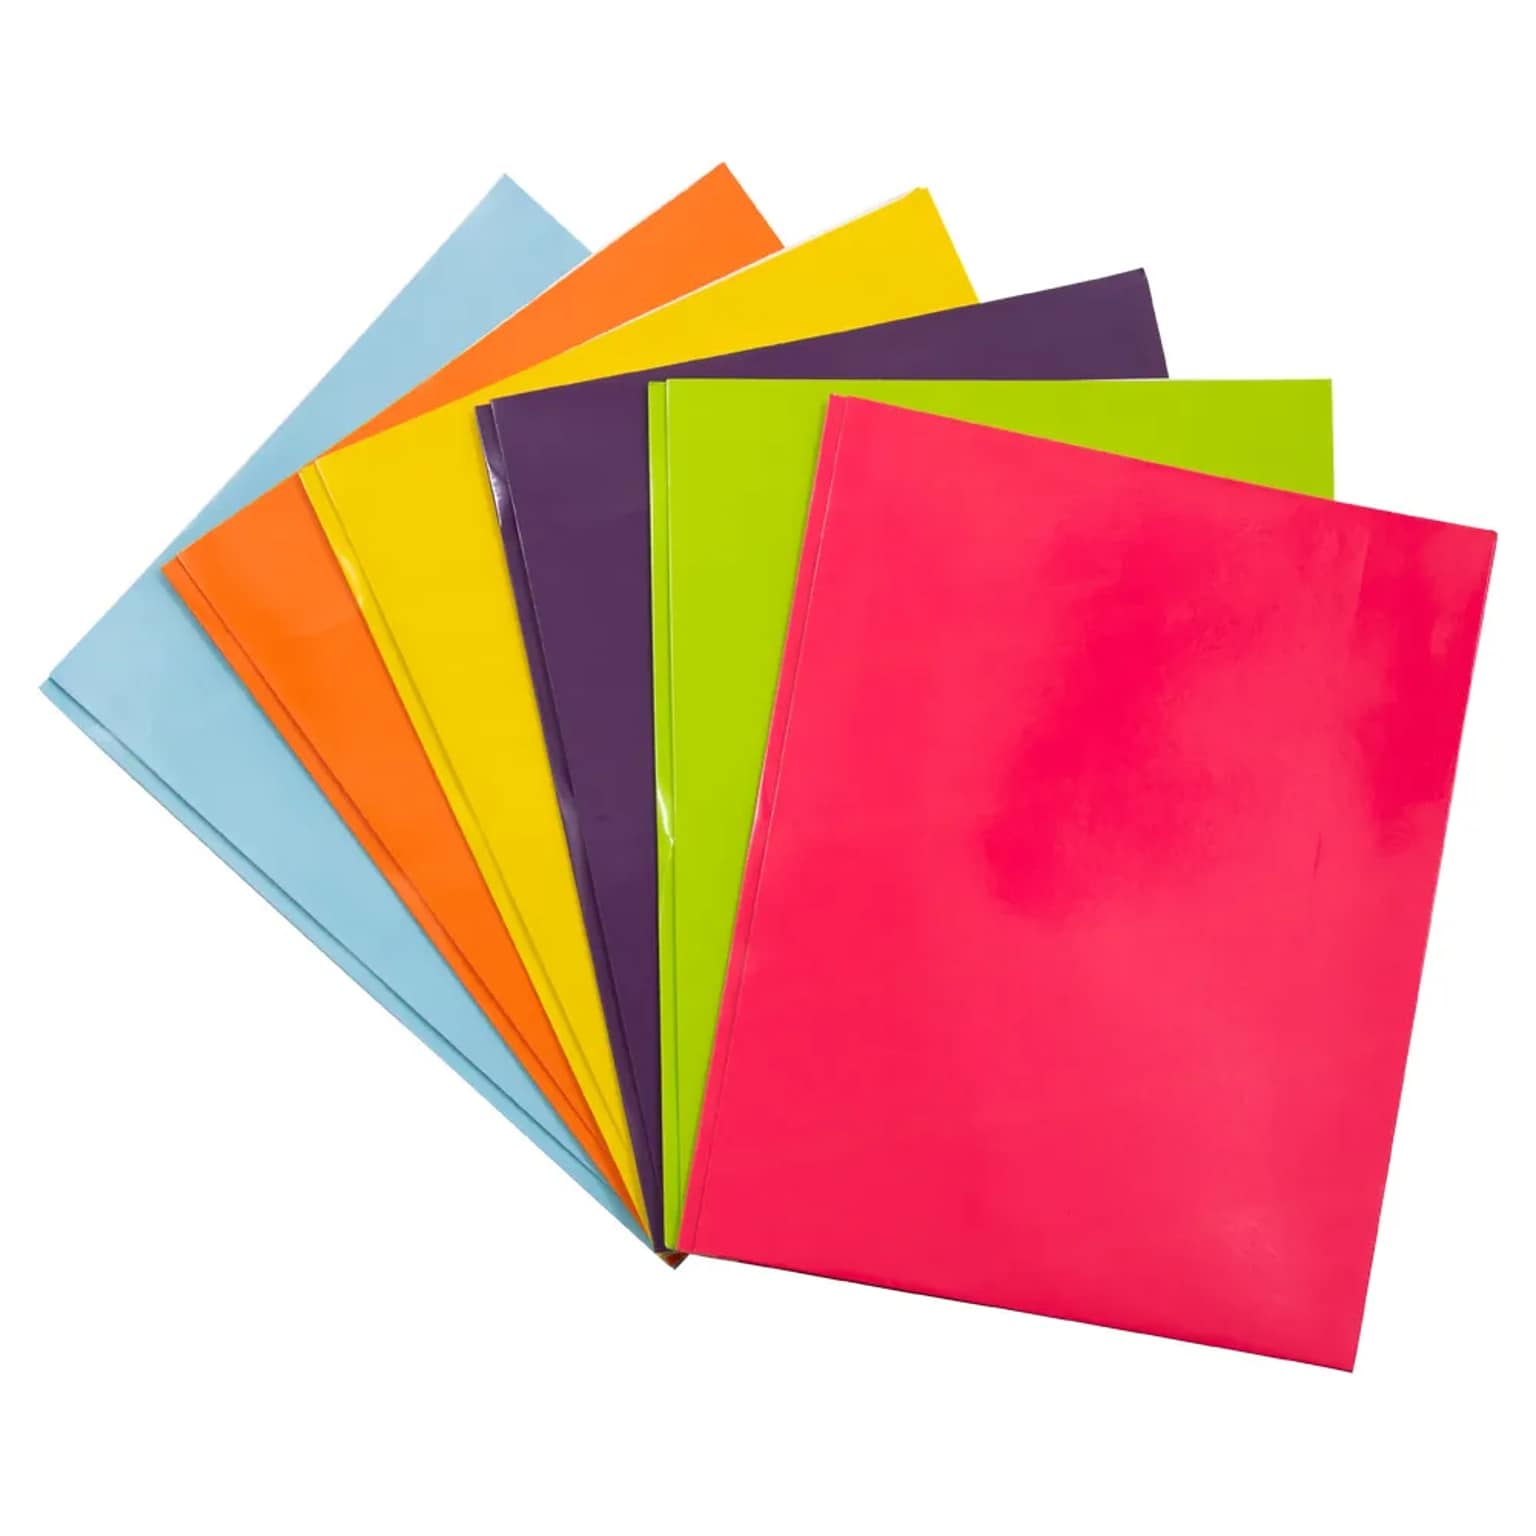 JAM Paper Laminated 2-Pocket Glossy Folders With Metal Clasps, Multicolored, Assorted Fashion Colors, 6/Pack (385GCFASSRT)